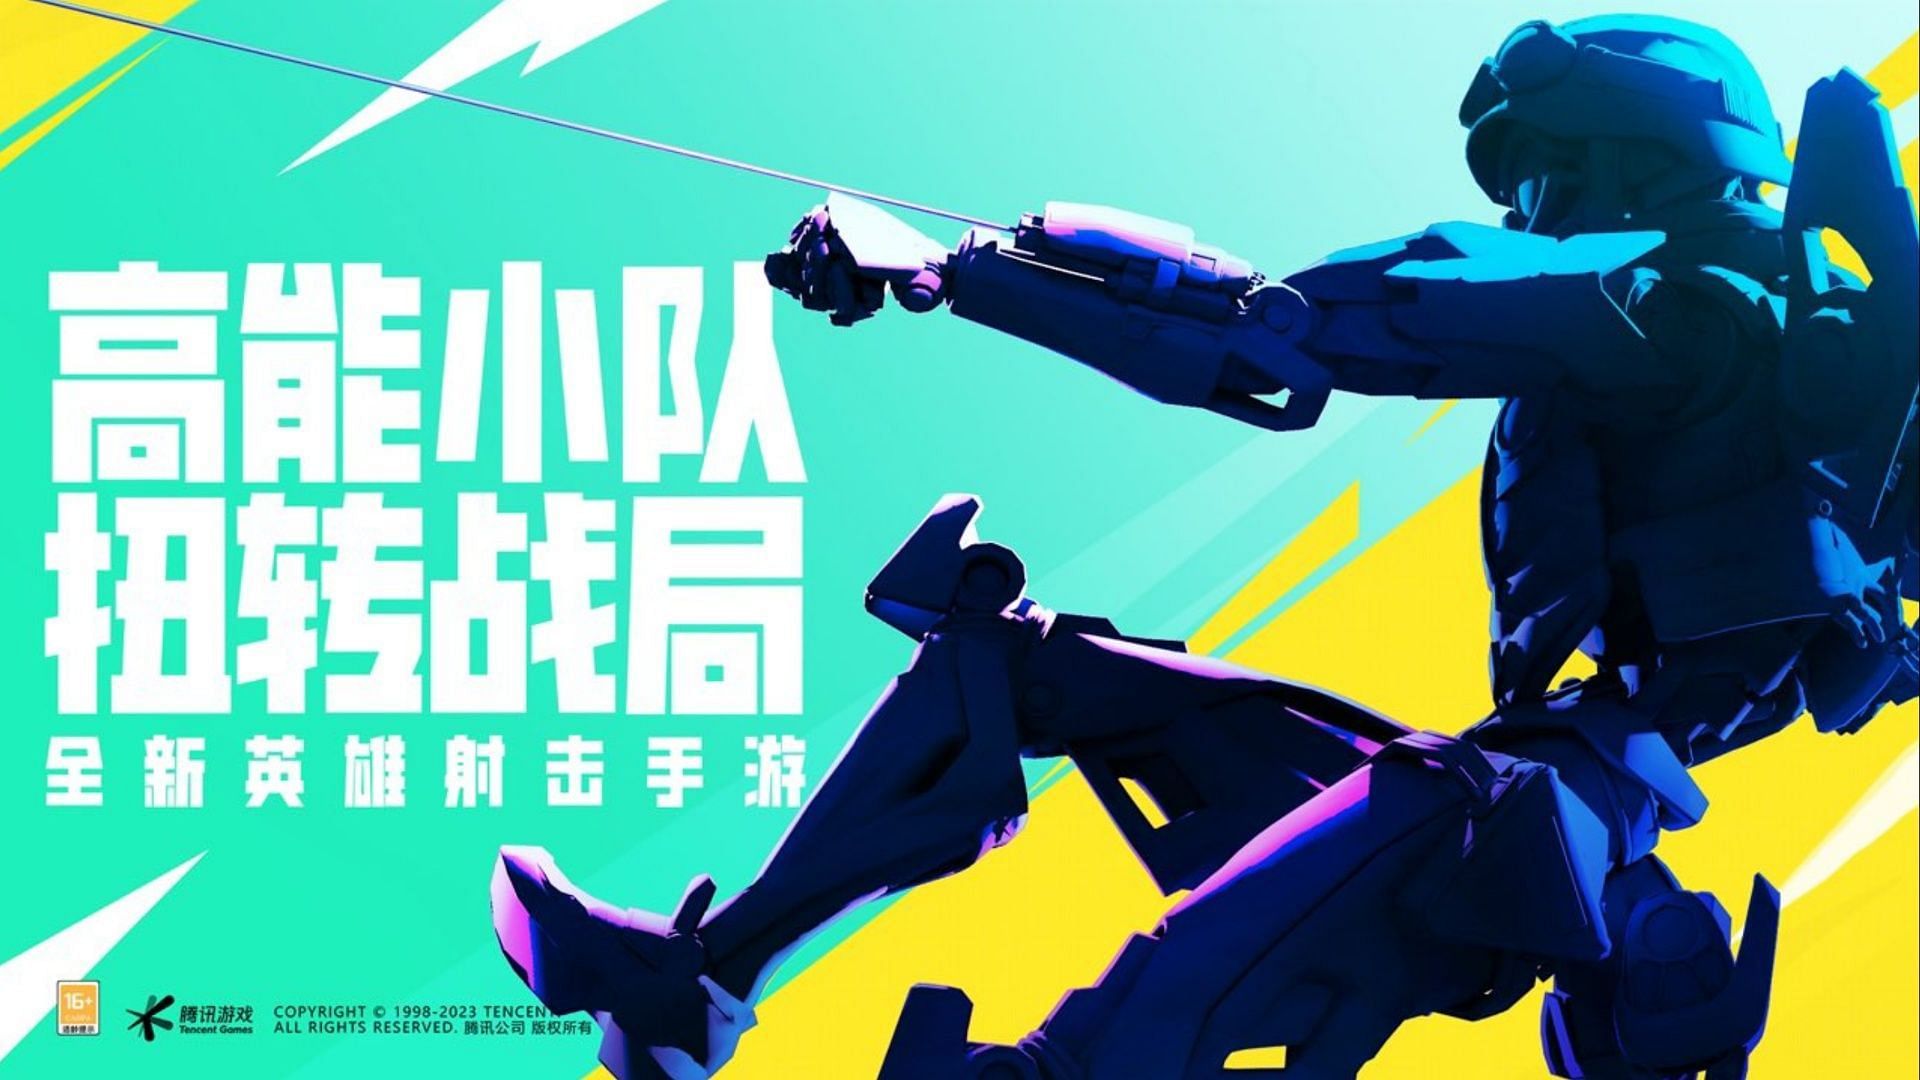 ImOw on X: Apex Legends Mobile 2.0 (Chinese version of the game) is set to  launch a beta in June 👀 According to @theleakerbot he believes the game is  launching towards the